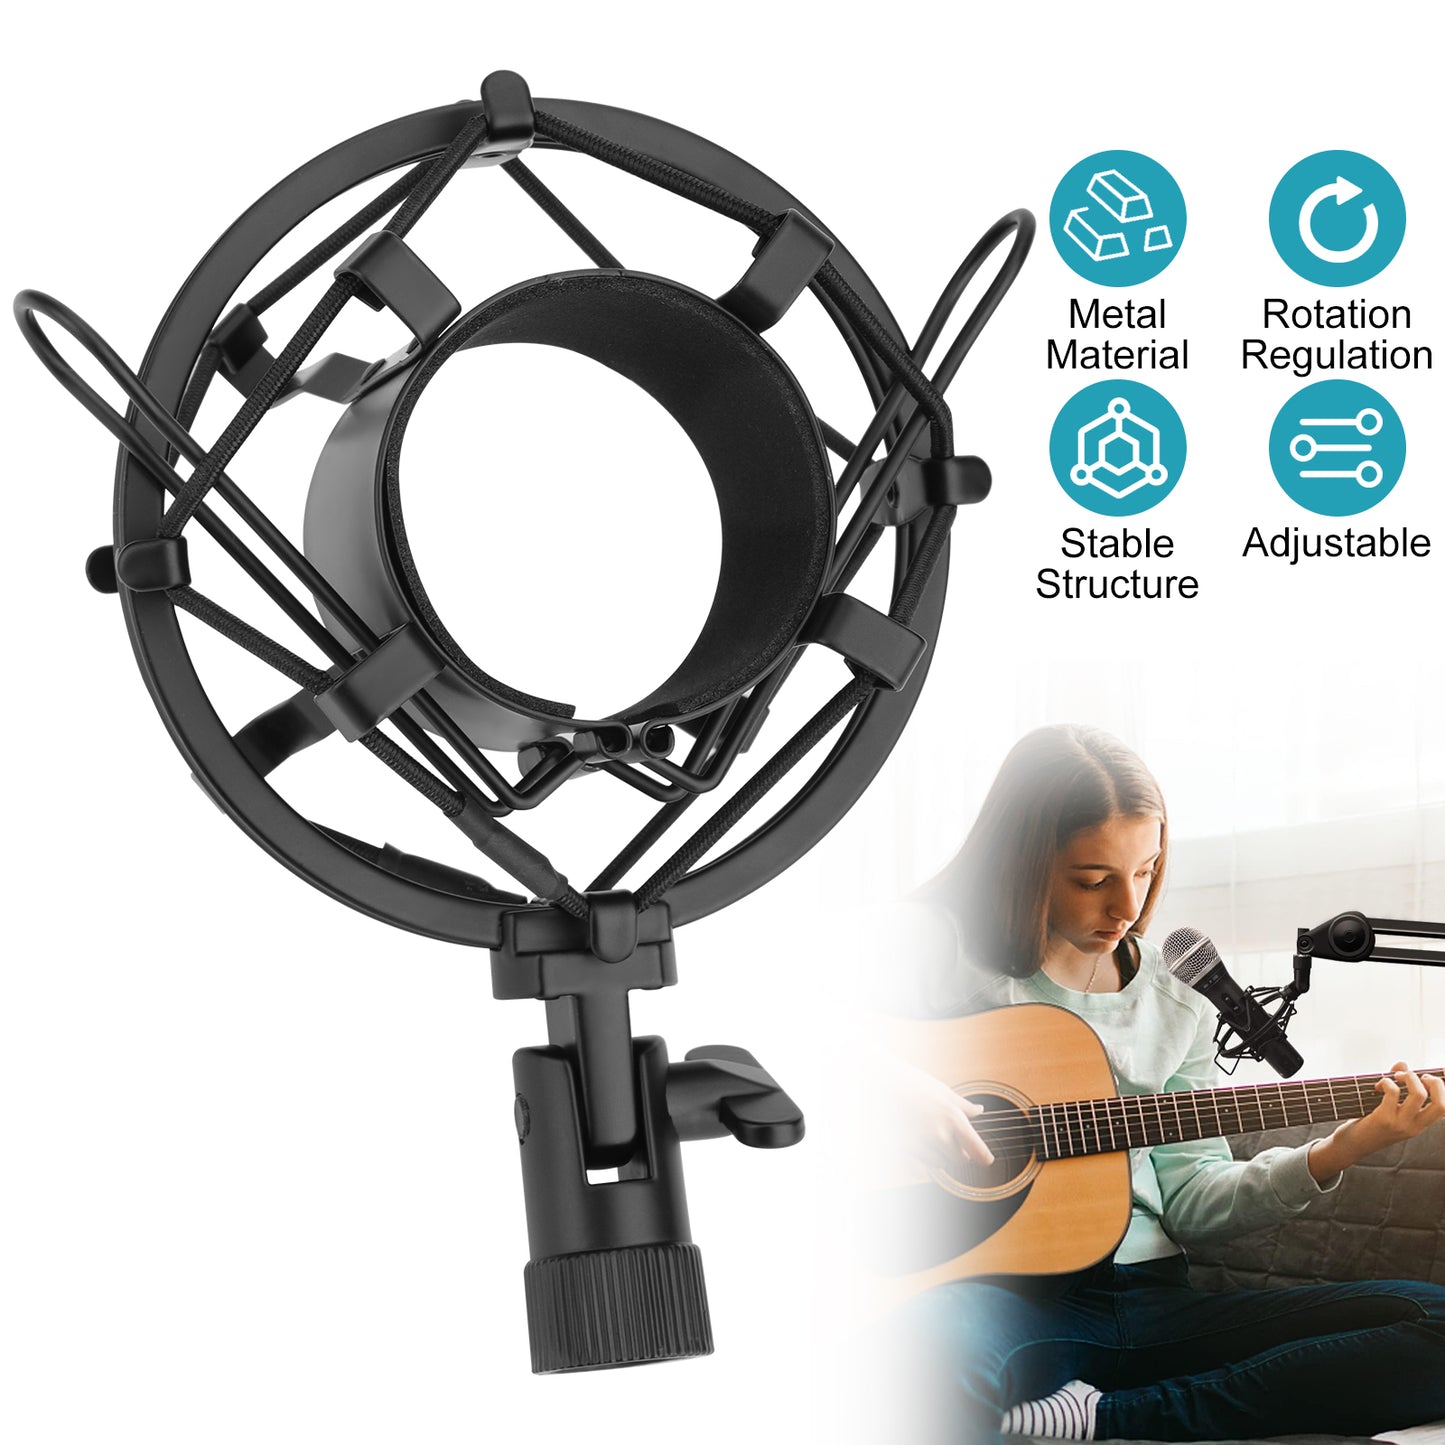 Universal Microphone Shock Mount - for Mics (48-53mm), Ensuring Stability and Enhanced Audio Quality,Compatible with AT2020, Rode NT1A, Heil PR40, Neumann TLM102, and More